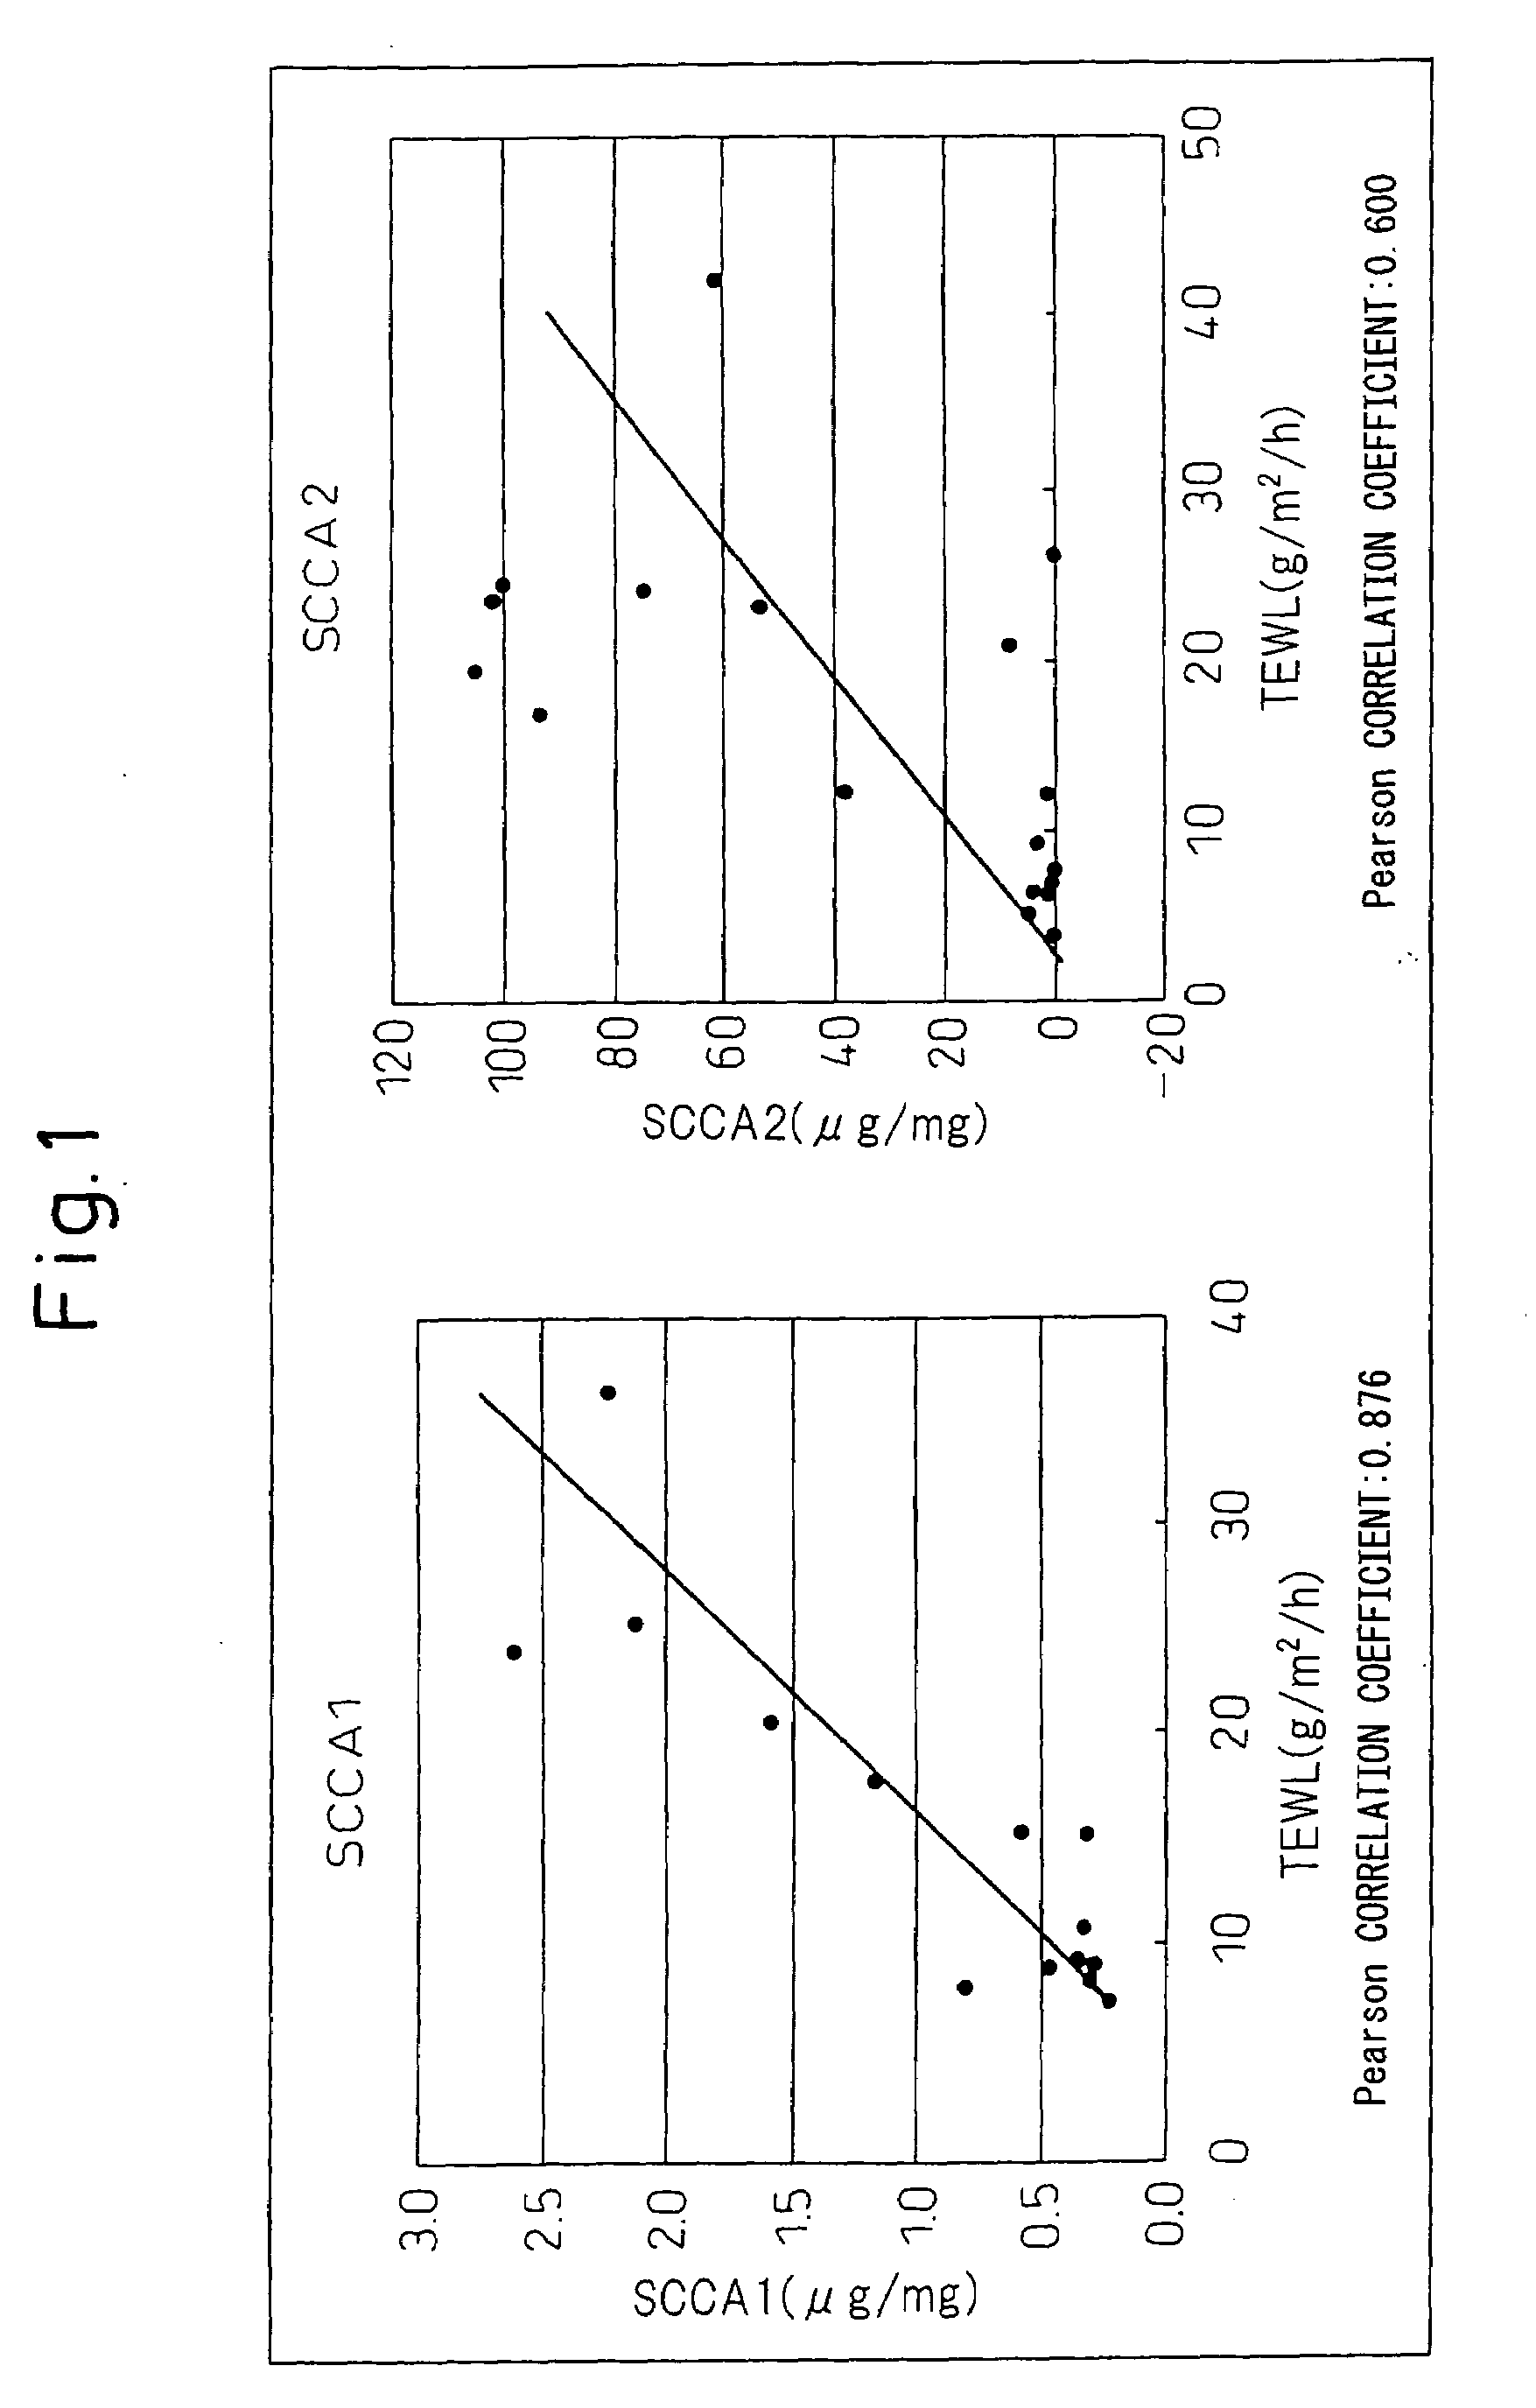 Method Of Evaluating Degree Of Skin Sensitivity Using Squamous Cell Carcinoma Antigen As An Indicator Thereof